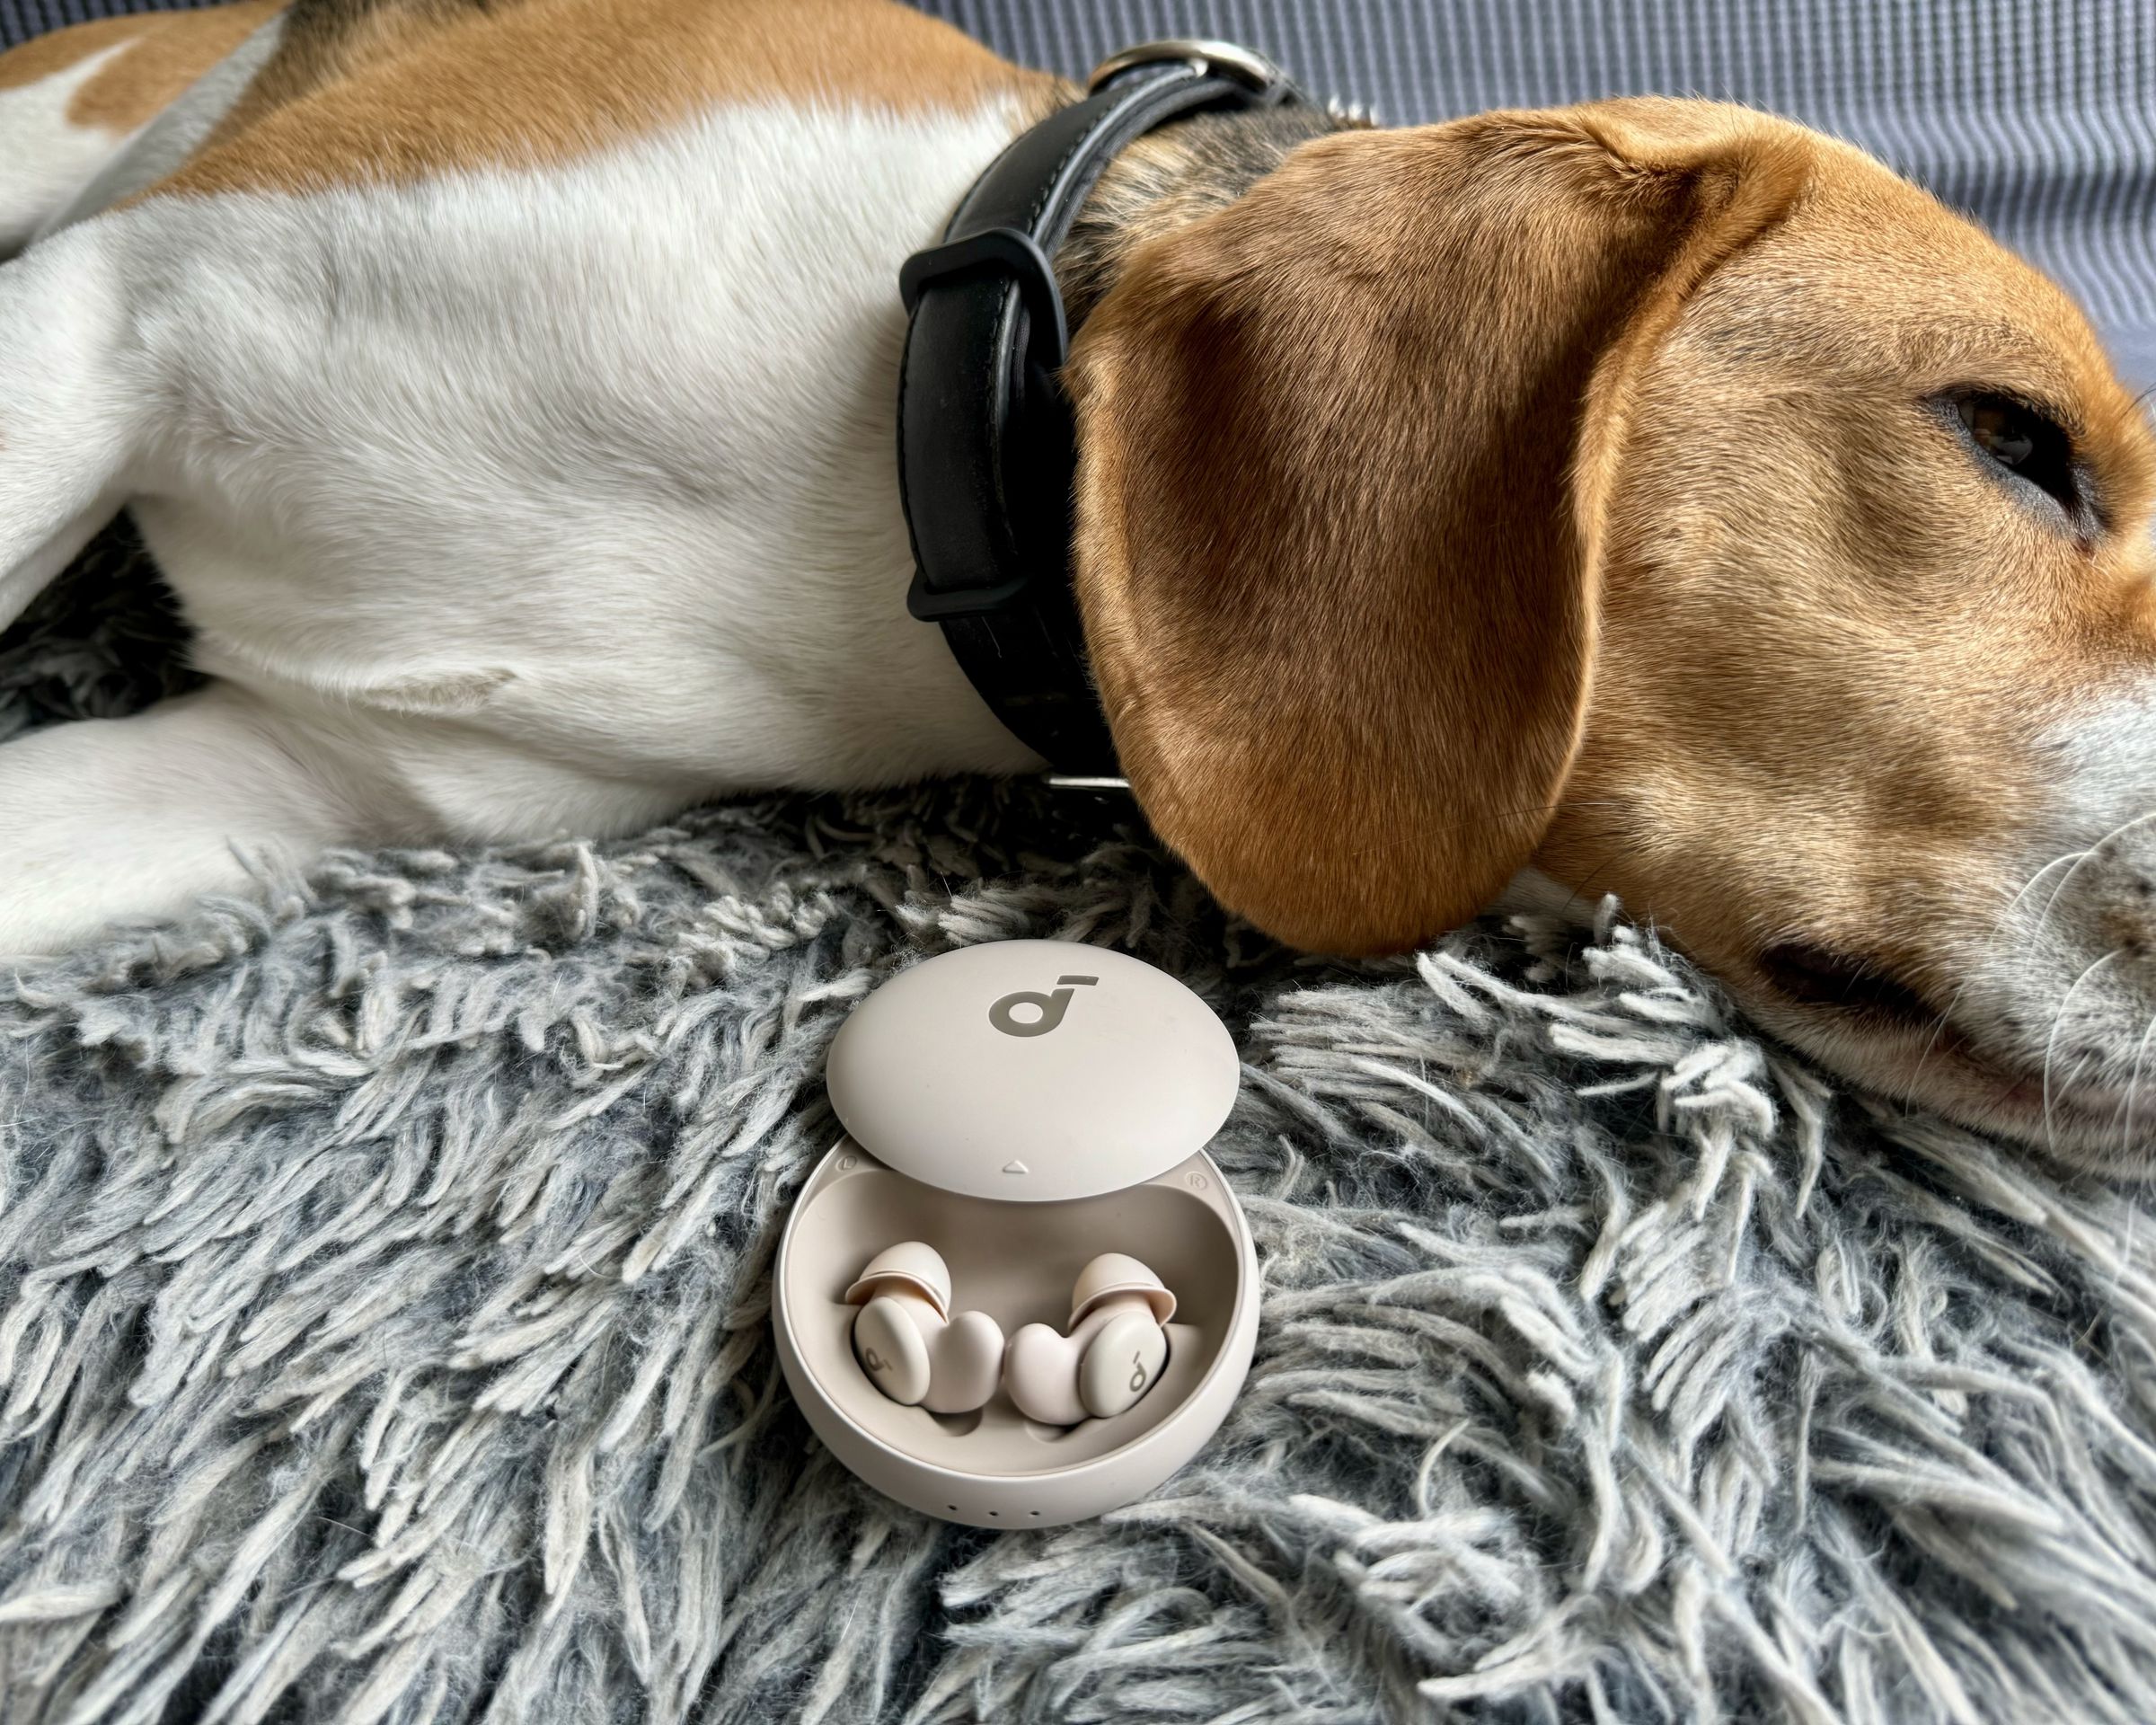 A beagle lies on its plush sleep mat with the Soundcore Sleep A20 earbuds shown in their case in the foreground.